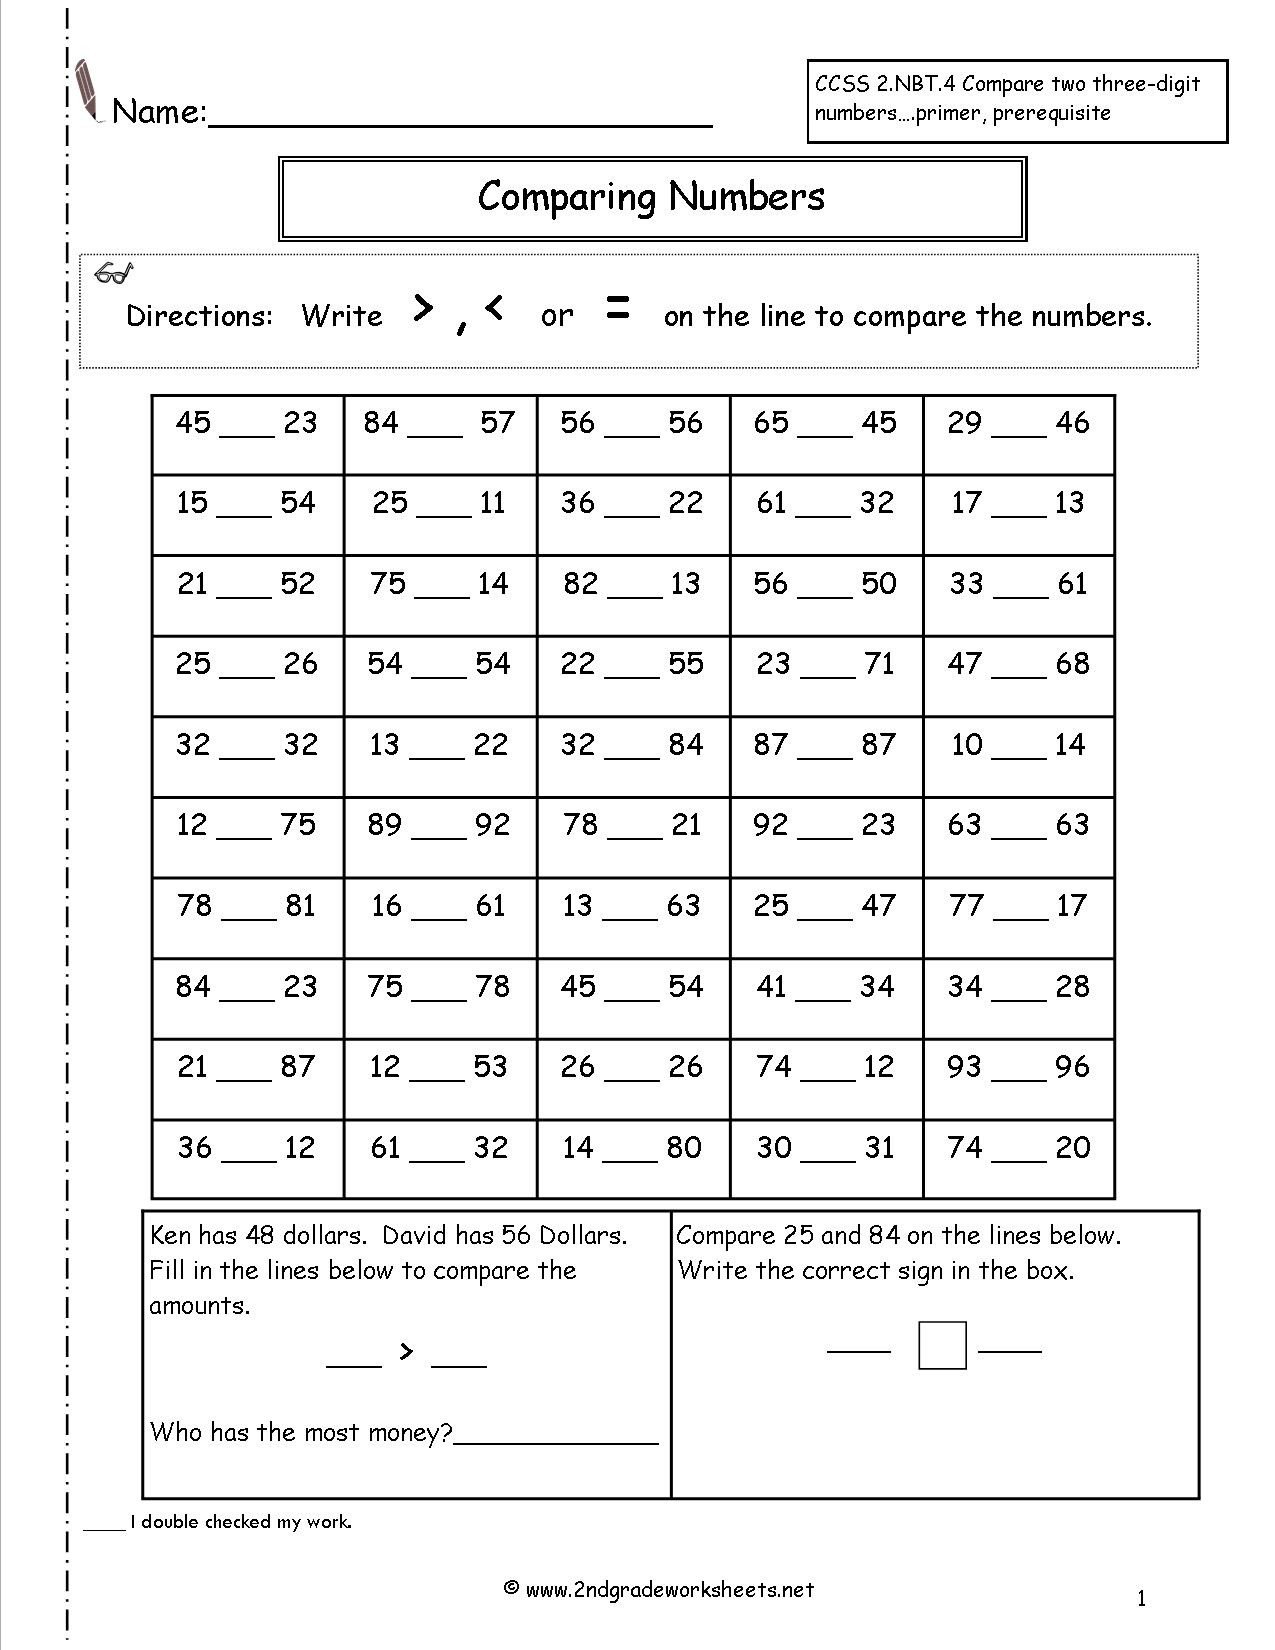 Comparing Numbers Worksheets 2nd Grade Paring Two and Three Digit Numbers Worksheets